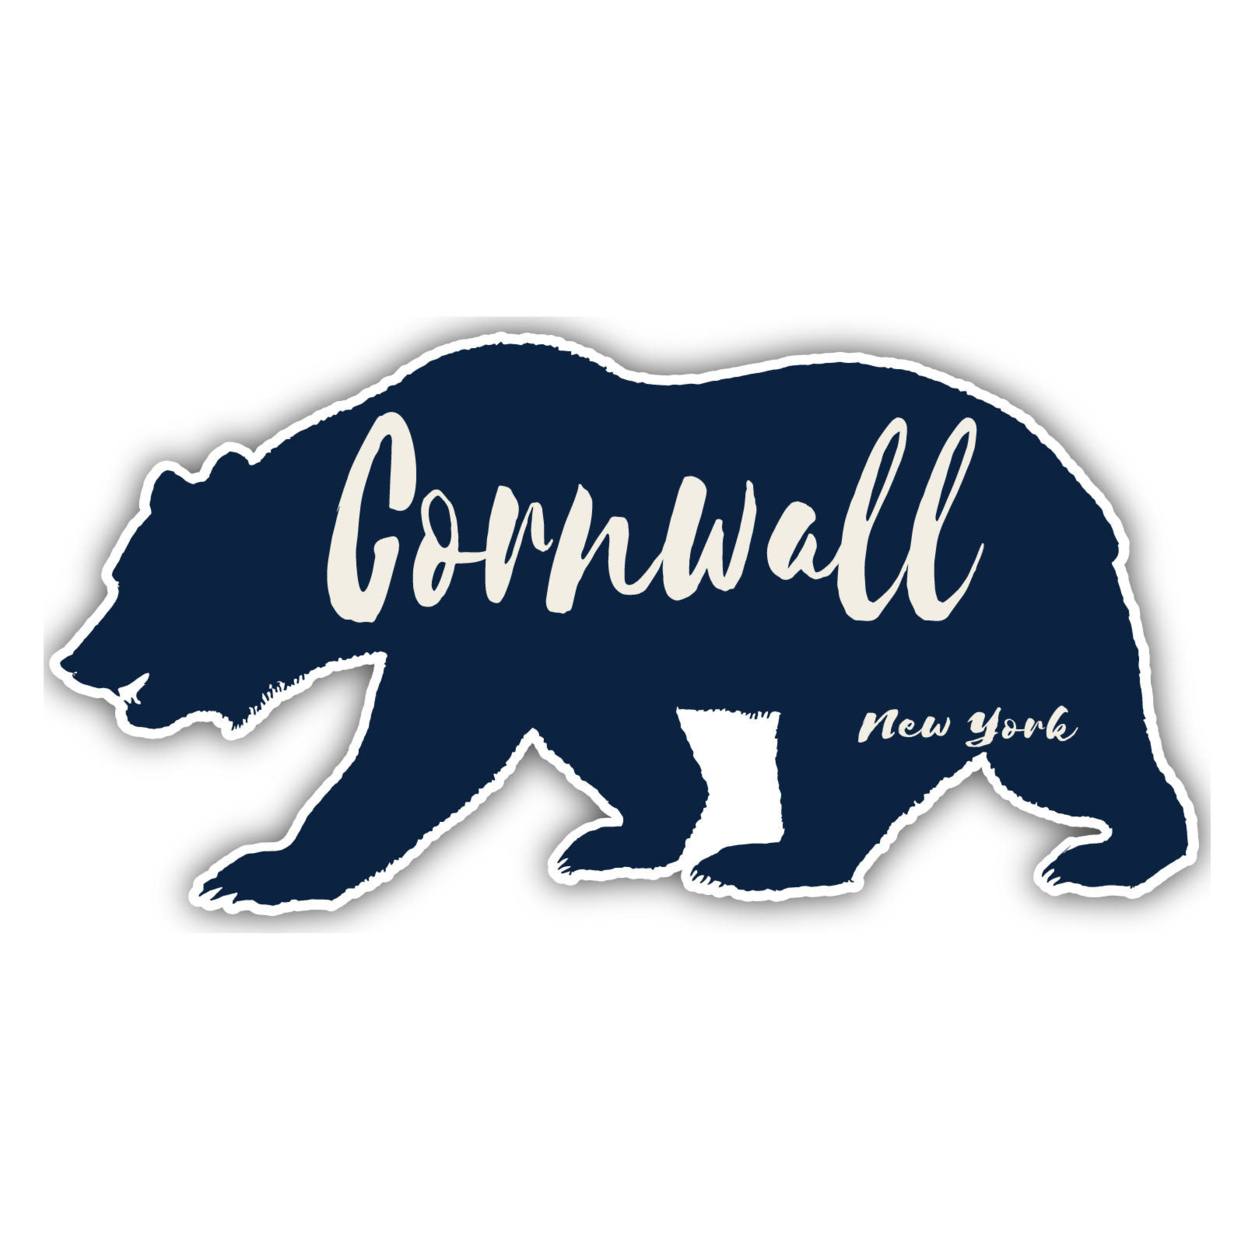 Cornwall New York Souvenir Decorative Stickers (Choose Theme And Size) - 4-Pack, 2-Inch, Bear